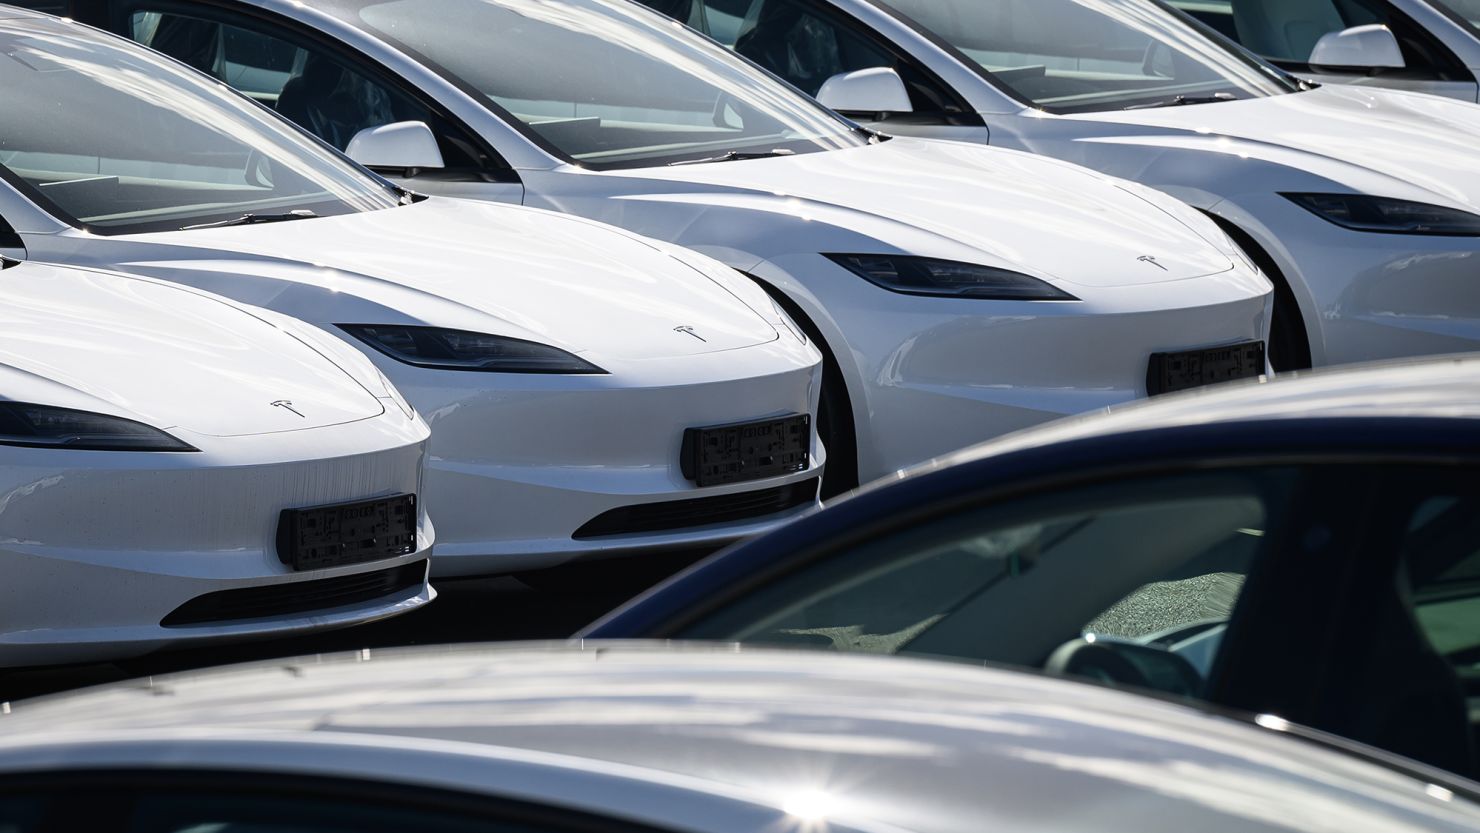 Rows of new Tesla cars are seen in a holding area near a customer collection point in London, England.